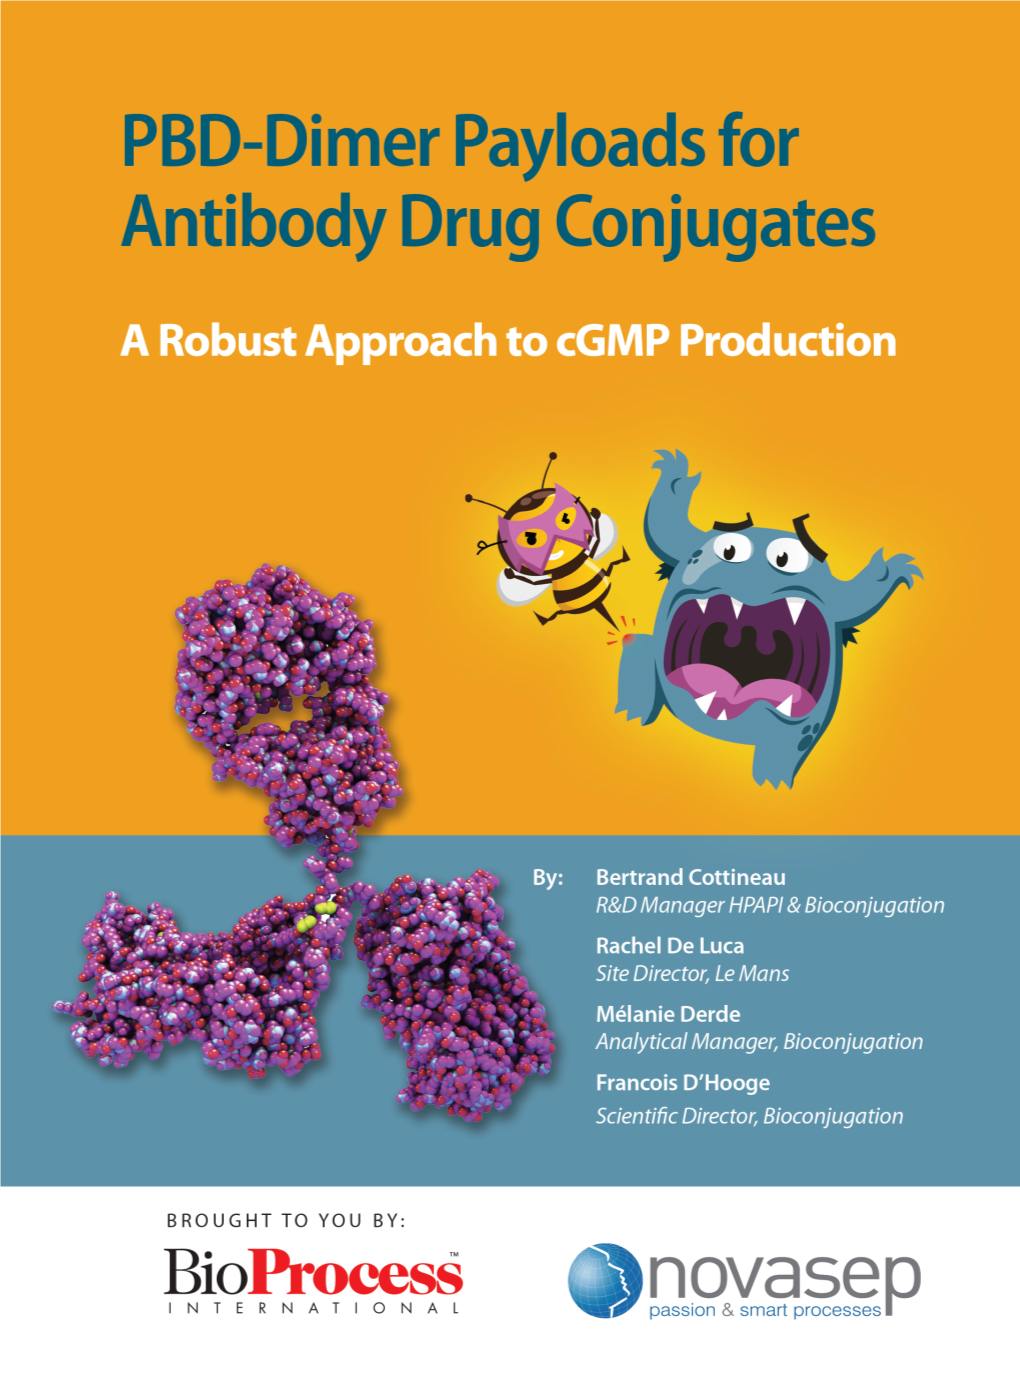 PBD-Dimer Payloads for Antibody Drug Conjugates a Robust Approach to Cgmp Production